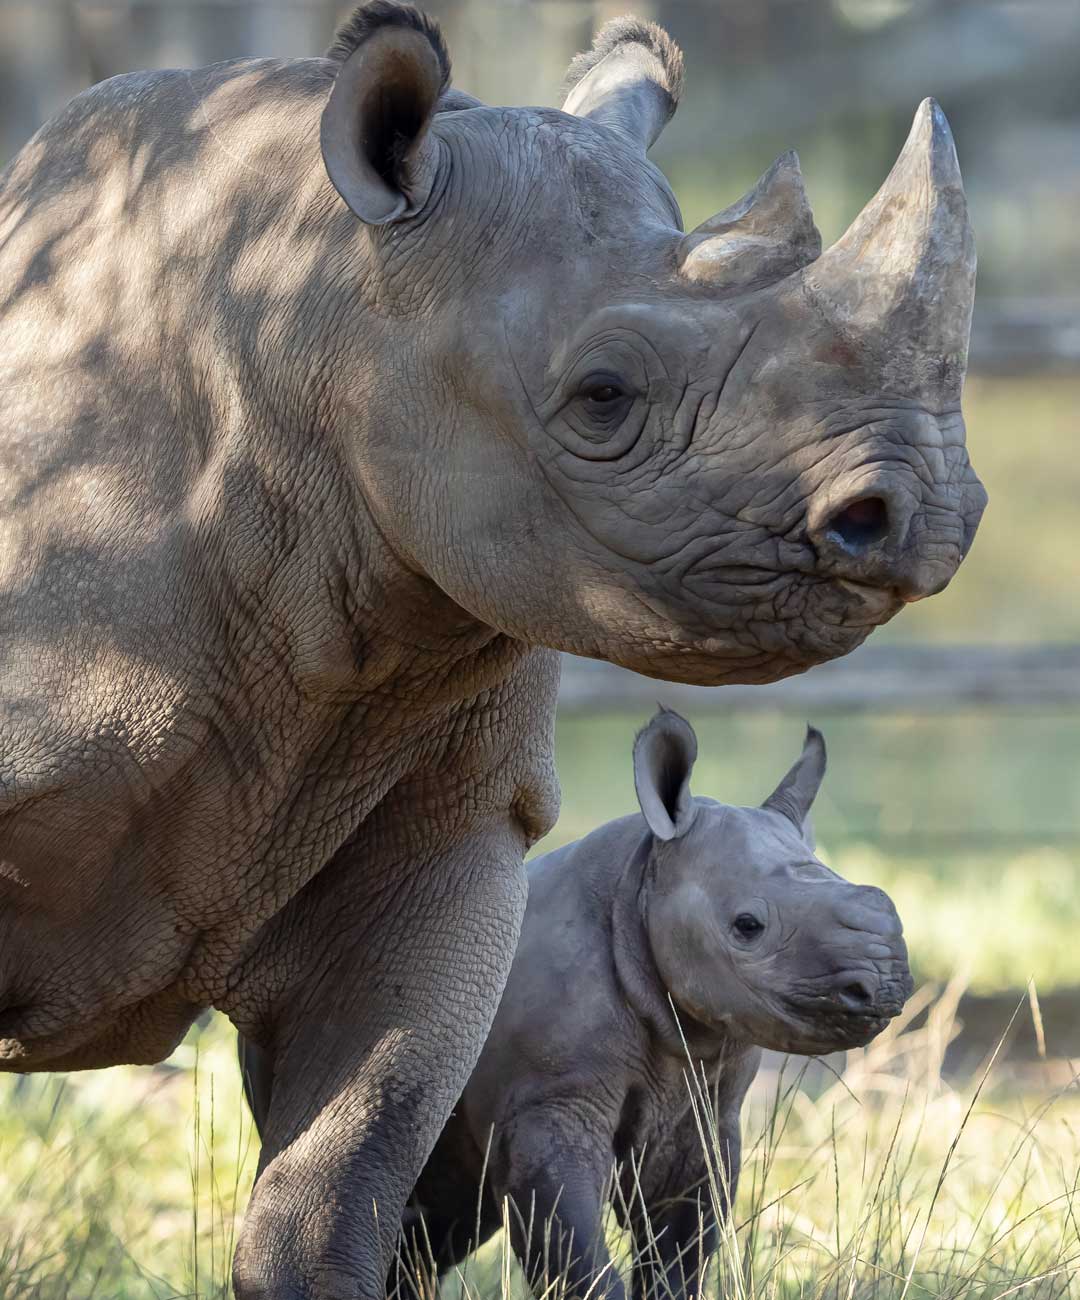 Proud mum Kufara had infertility issues until Taronga’s team stepped in to help. The recent arrival of calf Matobo has played an important role in advancing our knowledge and understanding of Southern Black Rhino biology.